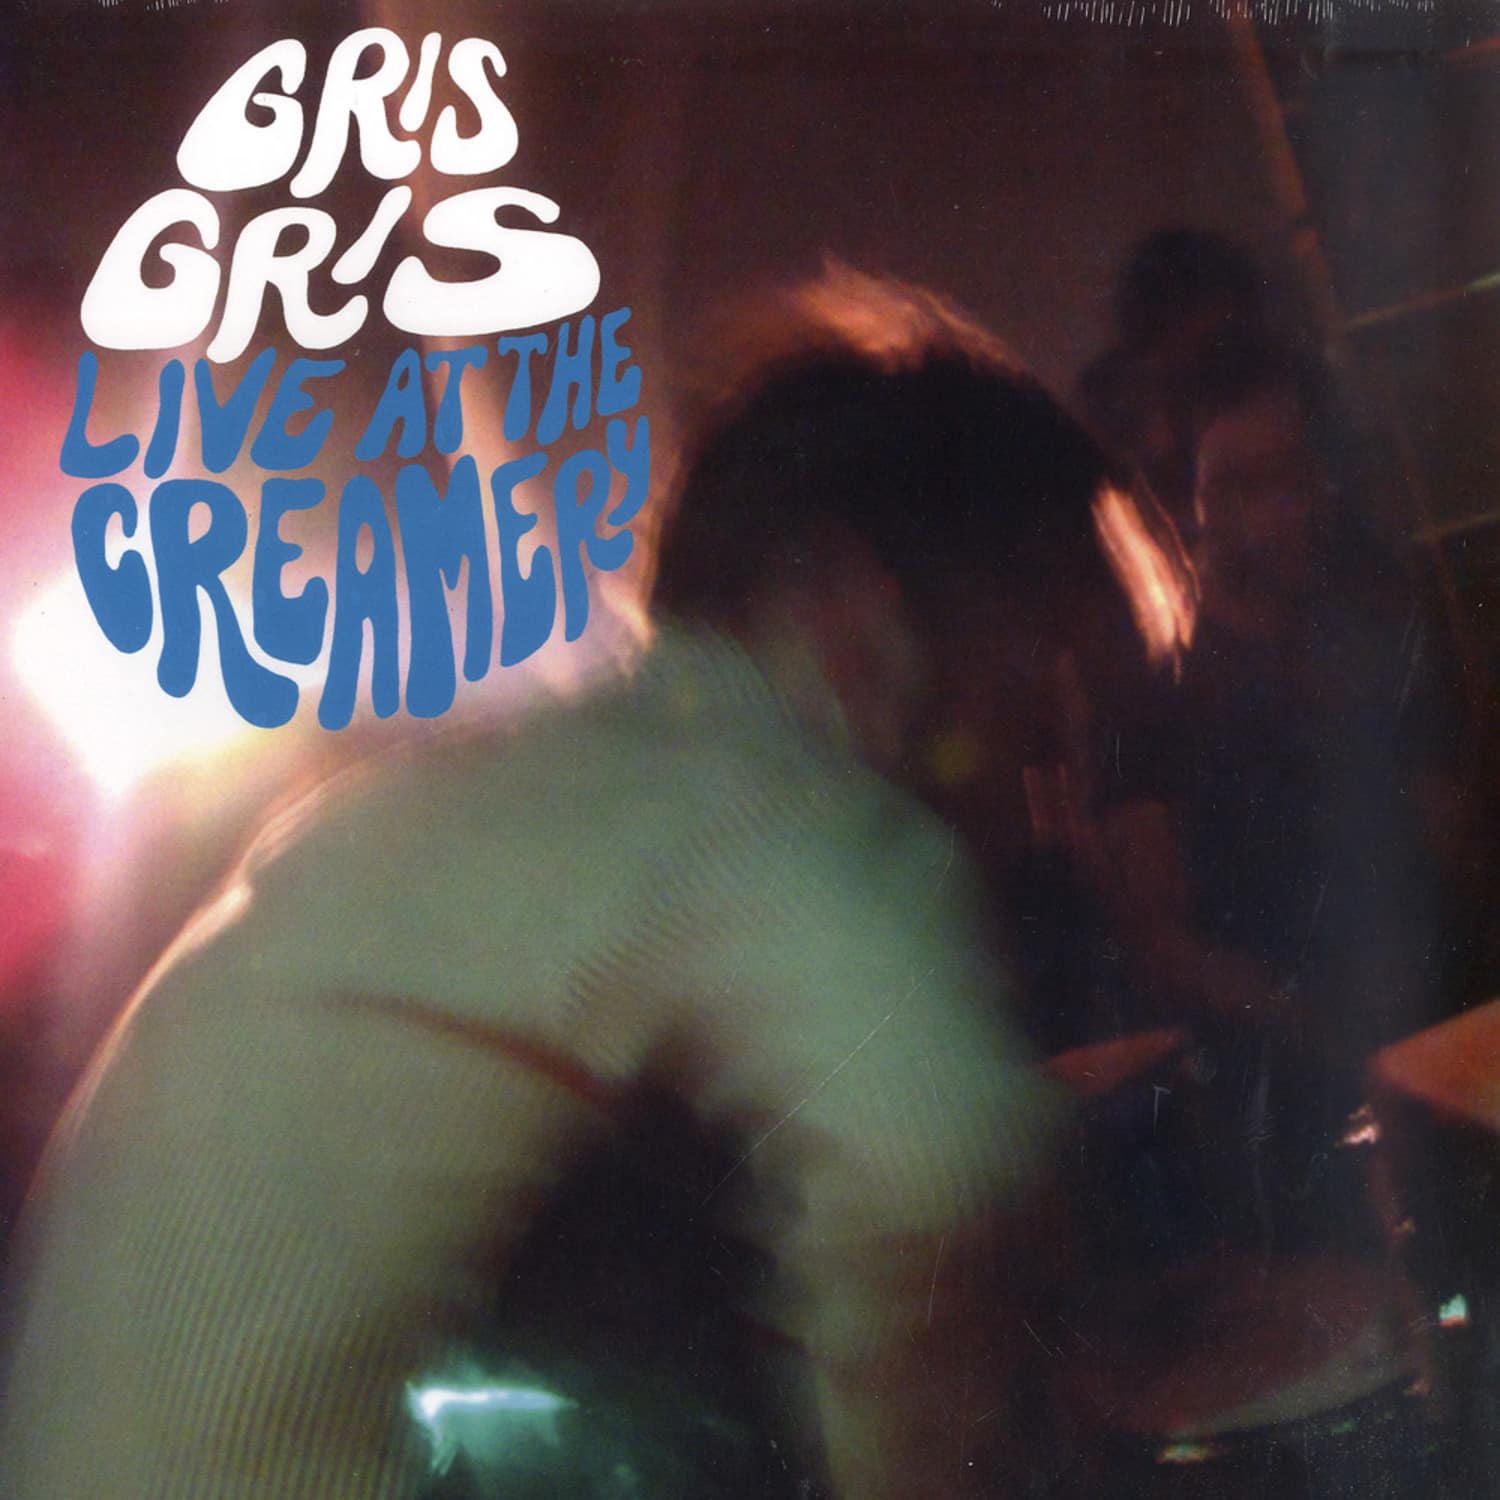 Gris Gris - LIVE AT THE CREAMERY